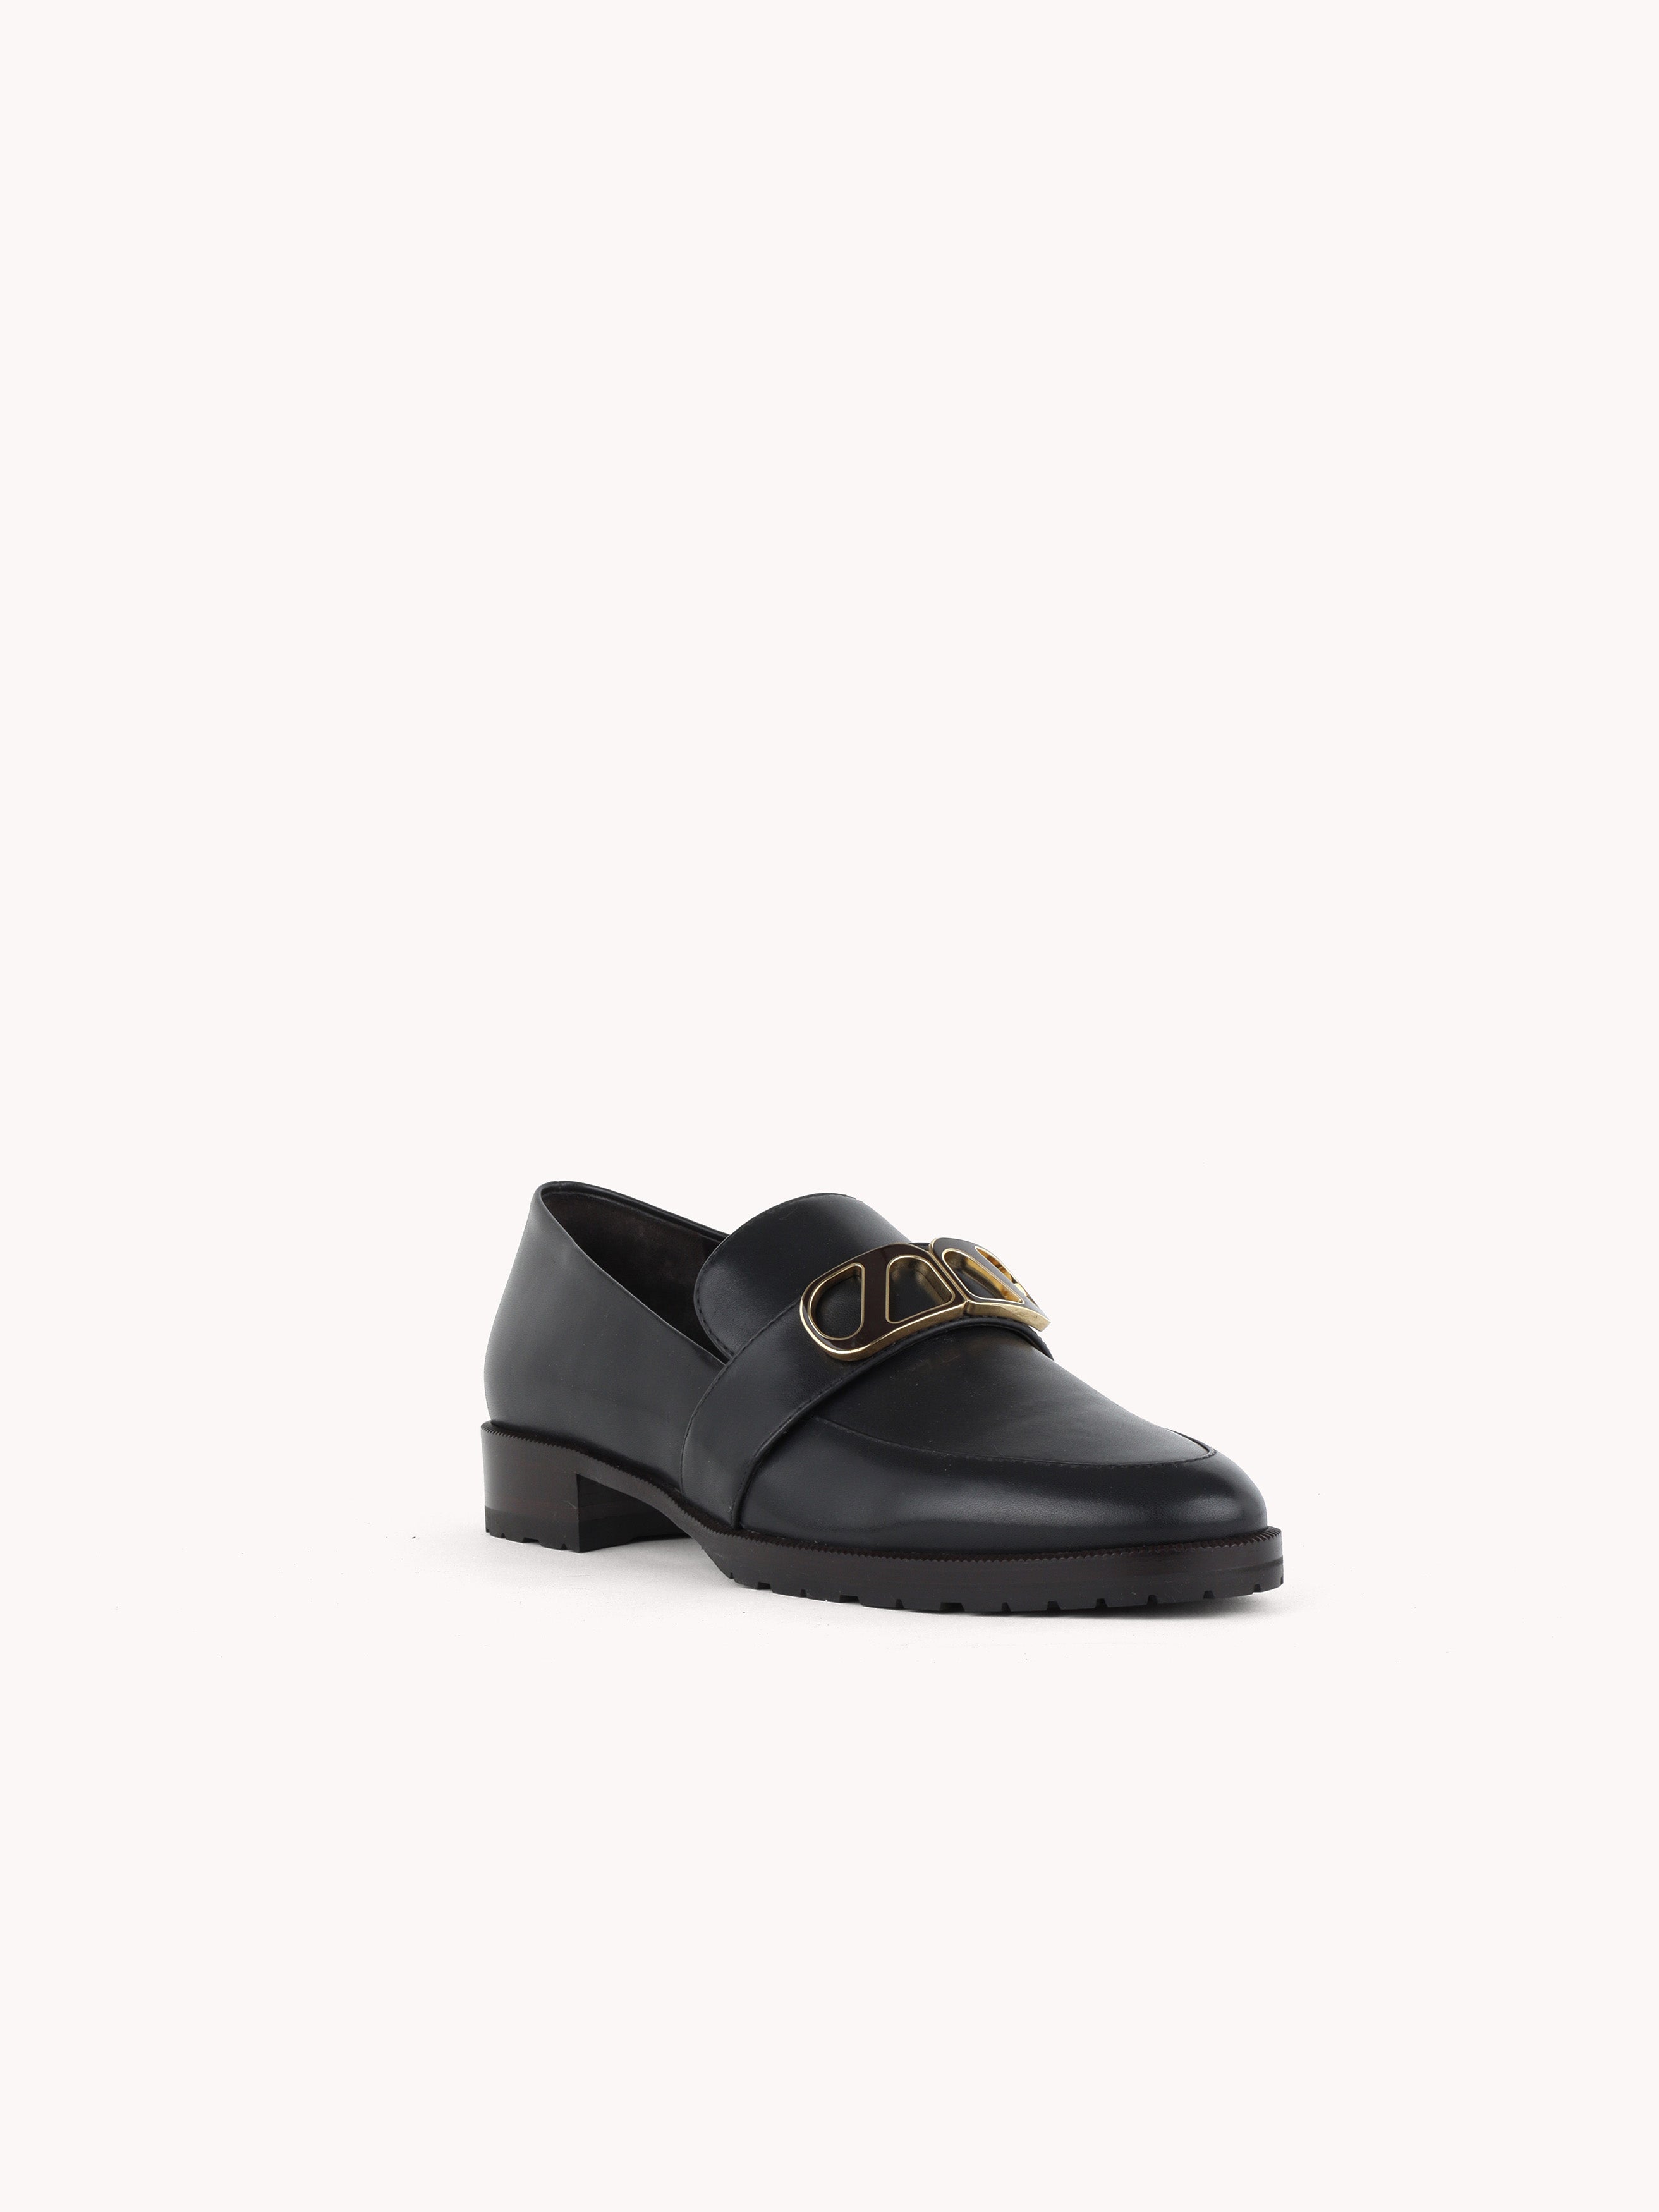 Blair London Piper Black Leather Loafers